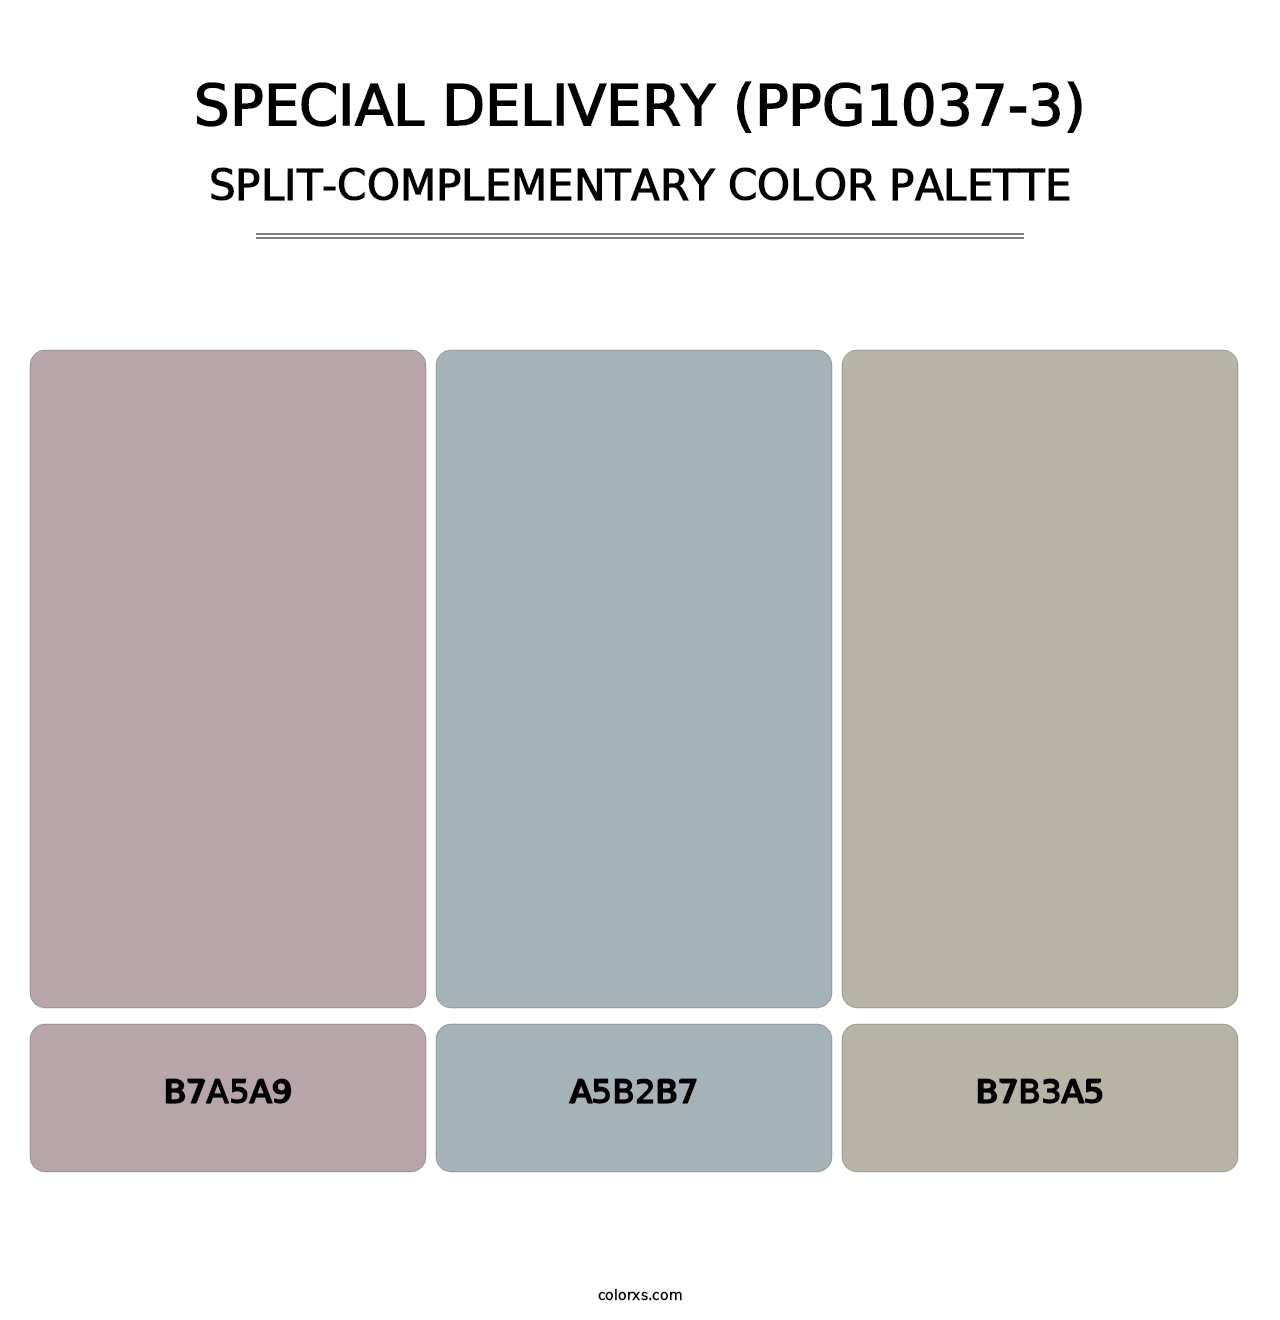 Special Delivery (PPG1037-3) - Split-Complementary Color Palette